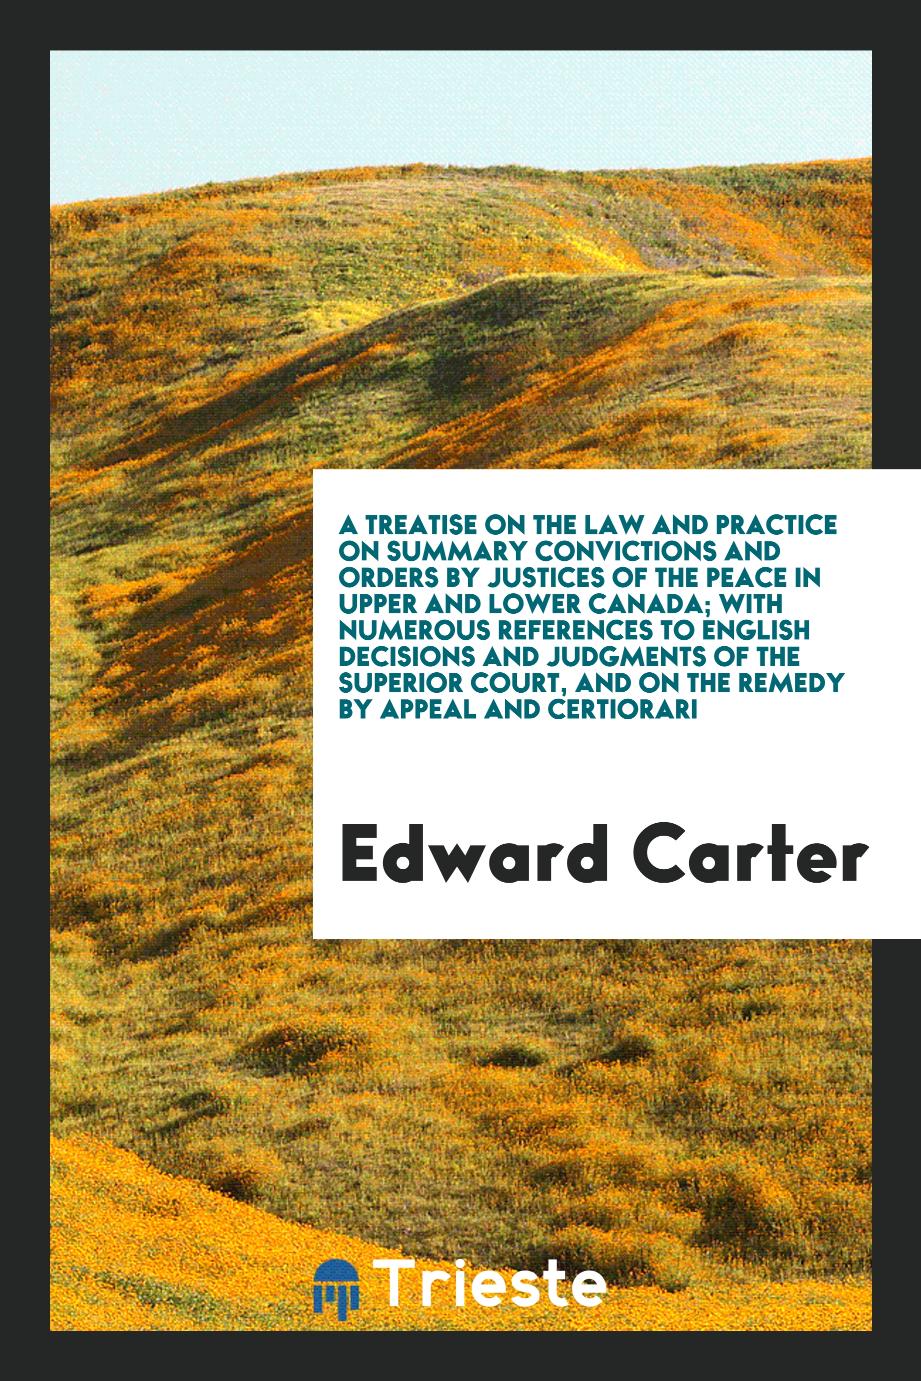 A Treatise on the Law and Practice on Summary Convictions and Orders by Justices of the Peace in Upper and Lower Canada; With Numerous References to English Decisions and Judgments of the Superior Court, and on the Remedy by Appeal and Certiorari